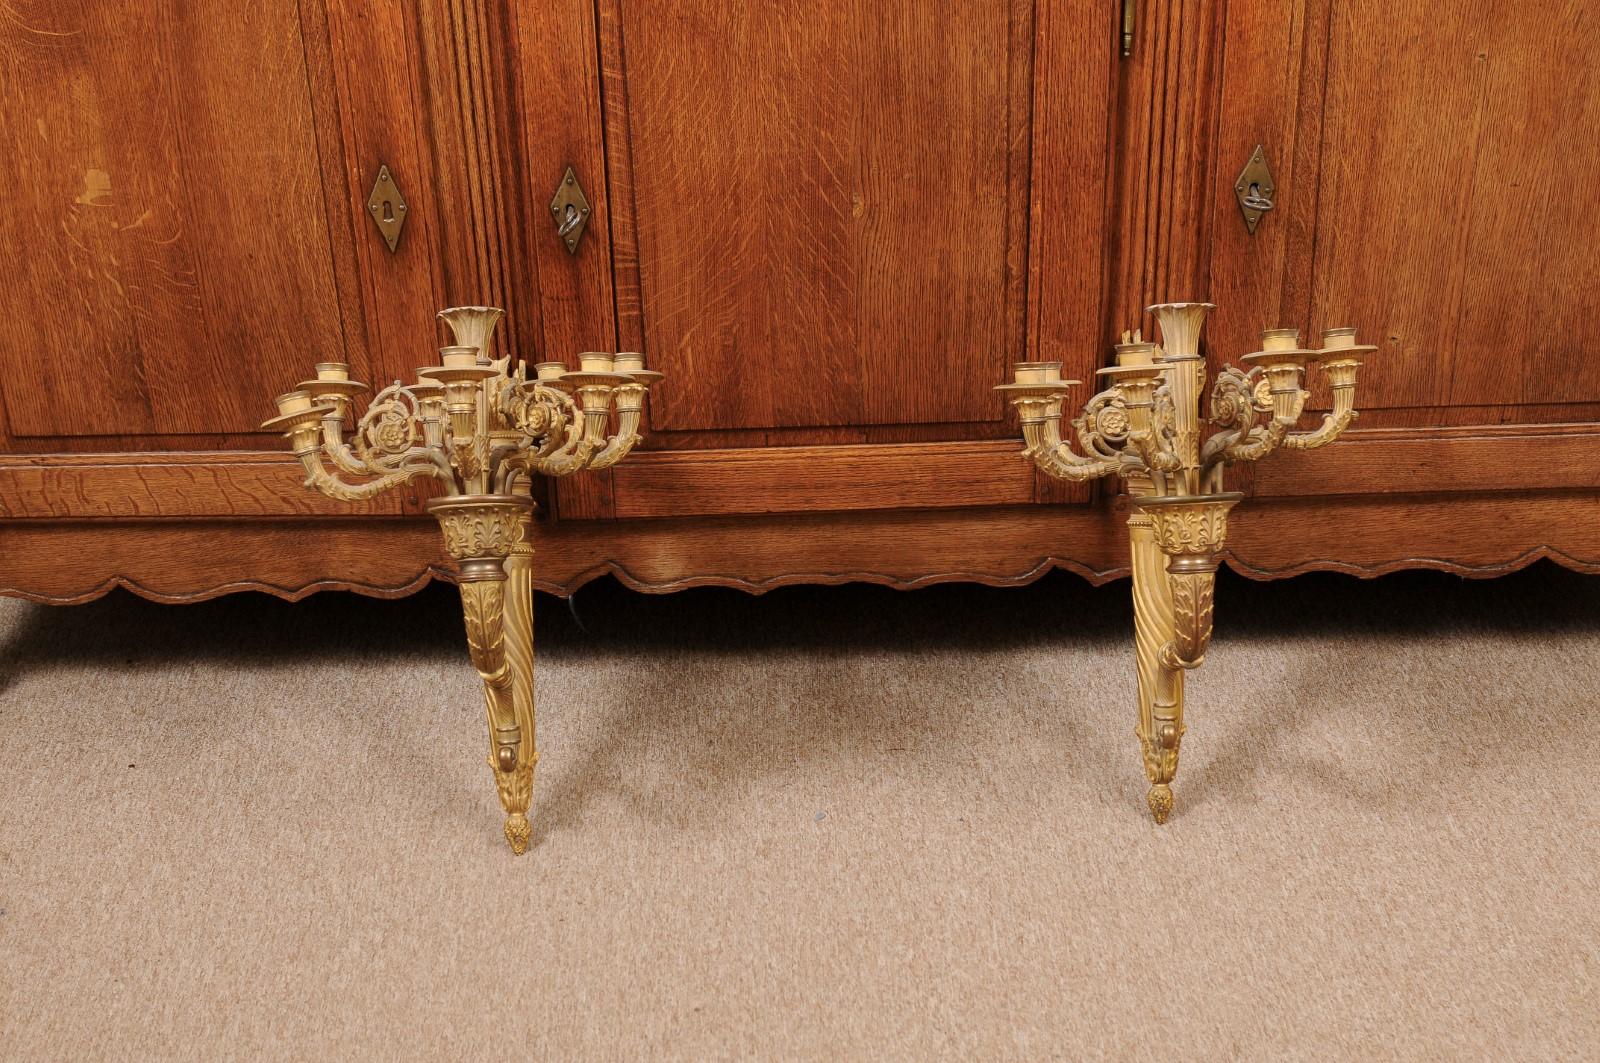 Pair of 19th century French Louis XVI style gilt bronze sconces with seven (7) candle arms. Not electrifed. Can be wired upon request.